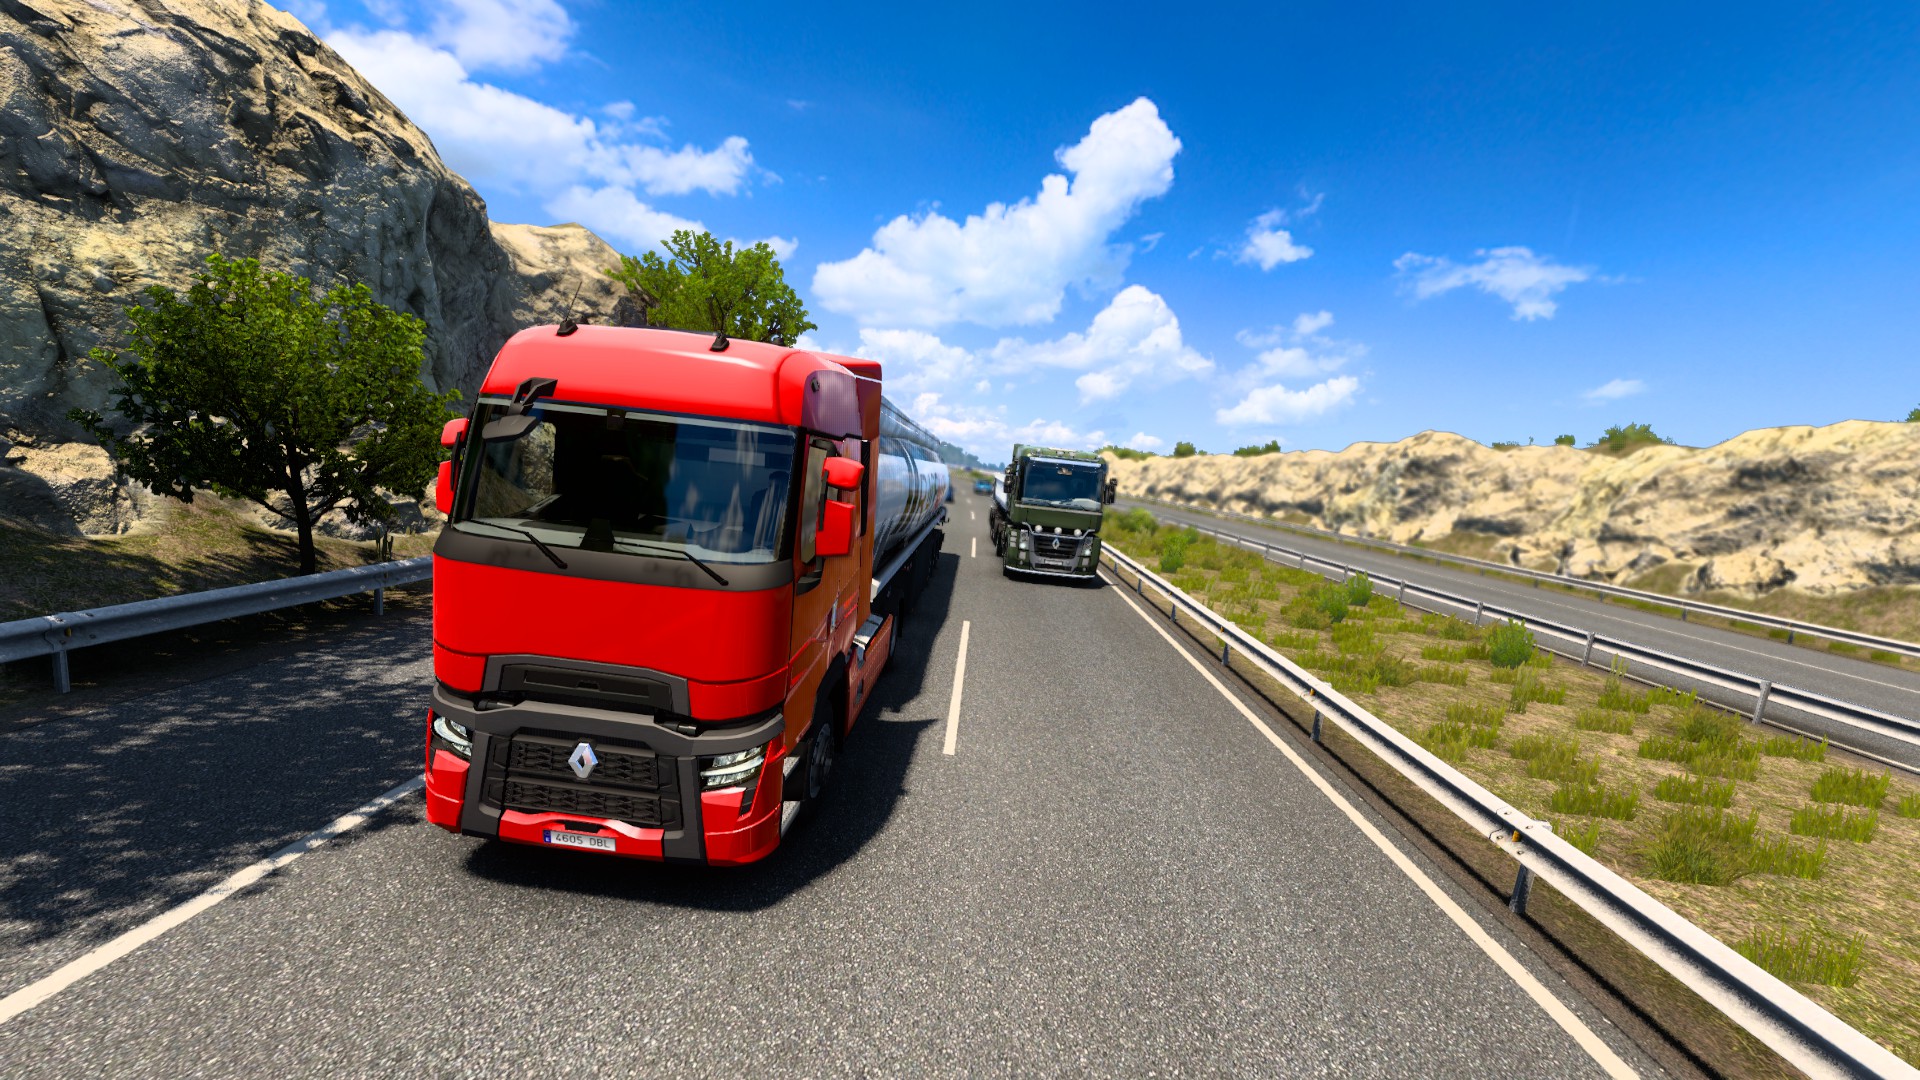 Euro Truck Simulator 2 multiplayer and more introduced in update 1.41 - Global Circulate